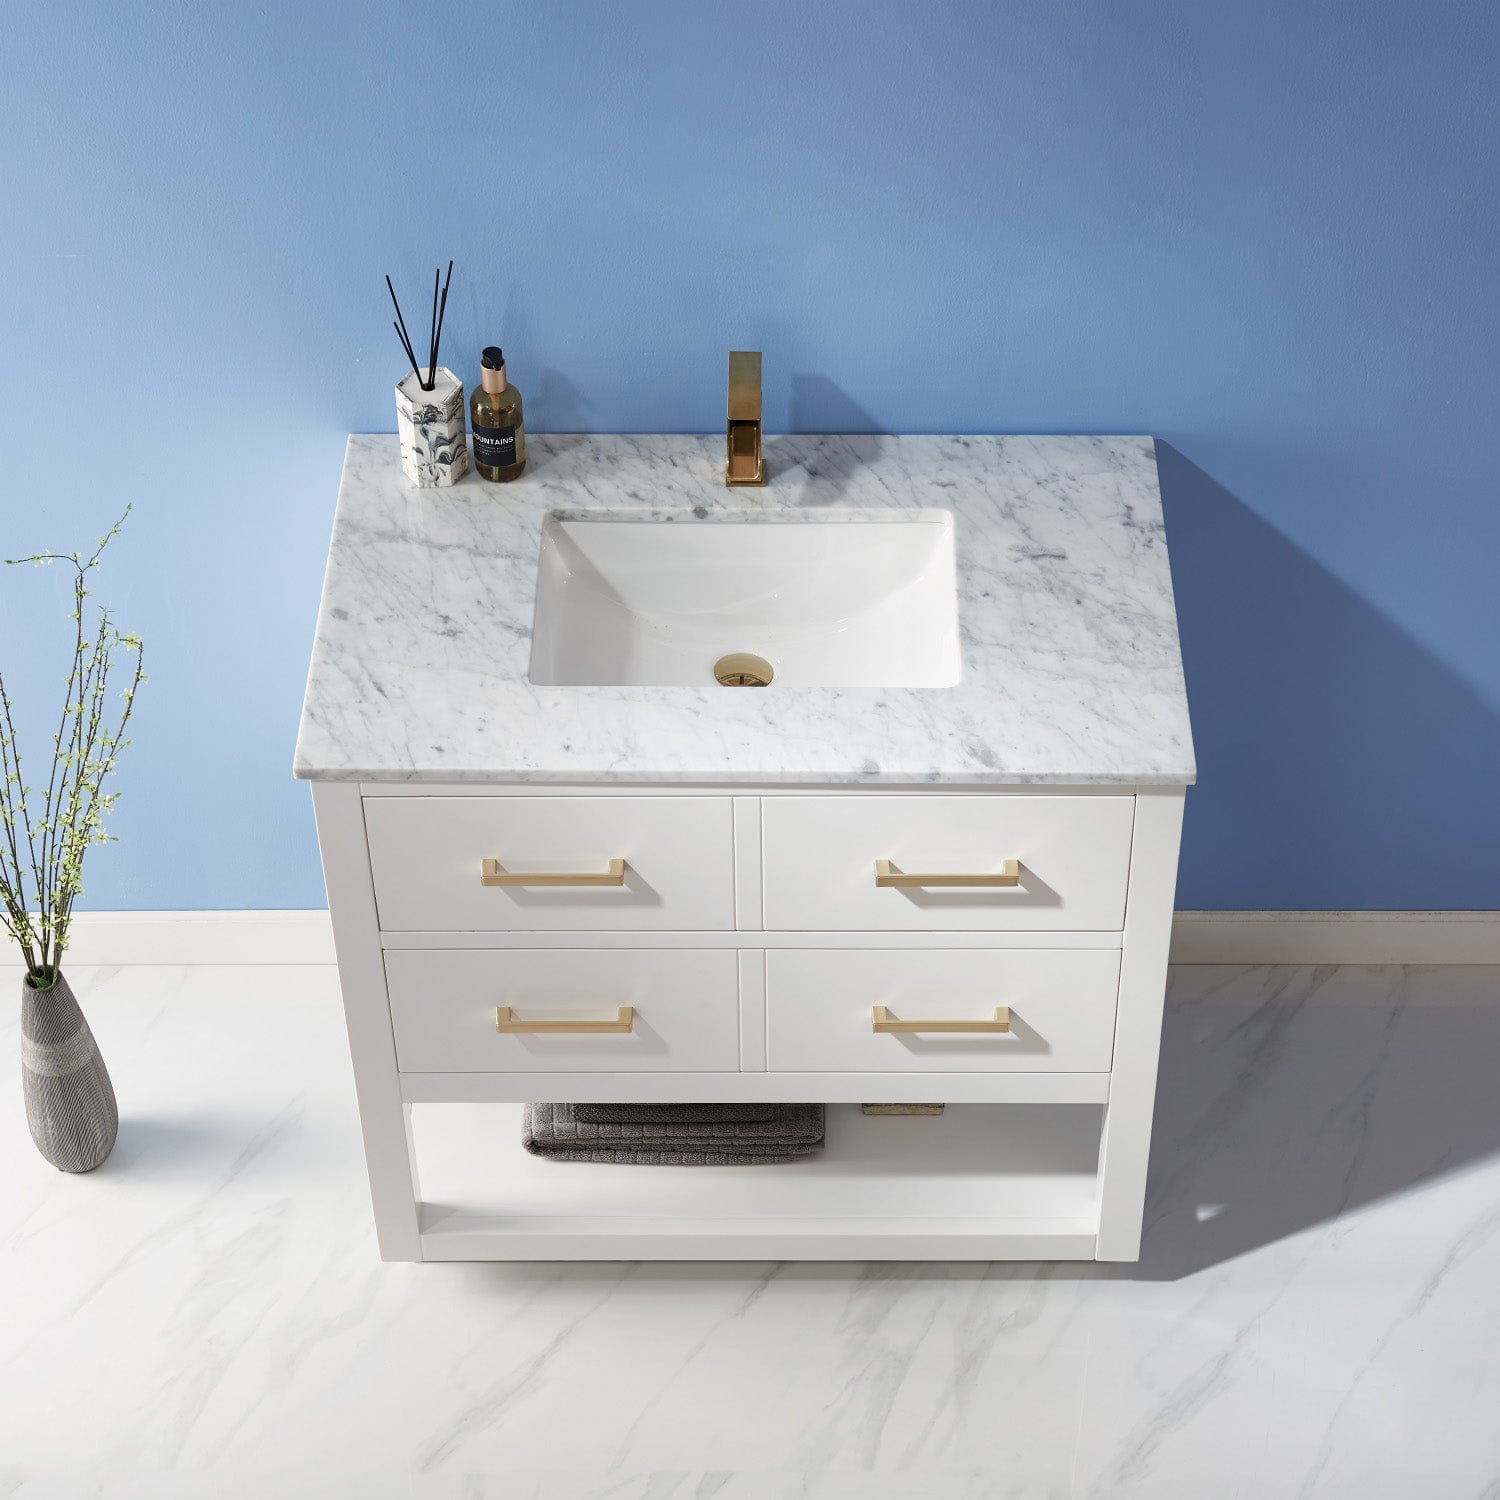 Remi 36" Single Bathroom Vanity Set in White and Carrara White Marble Countertop without Mirror 532036-WH-CA-NM - Molaix631112971447Bathroom Vanities532036-WH-CA-NM